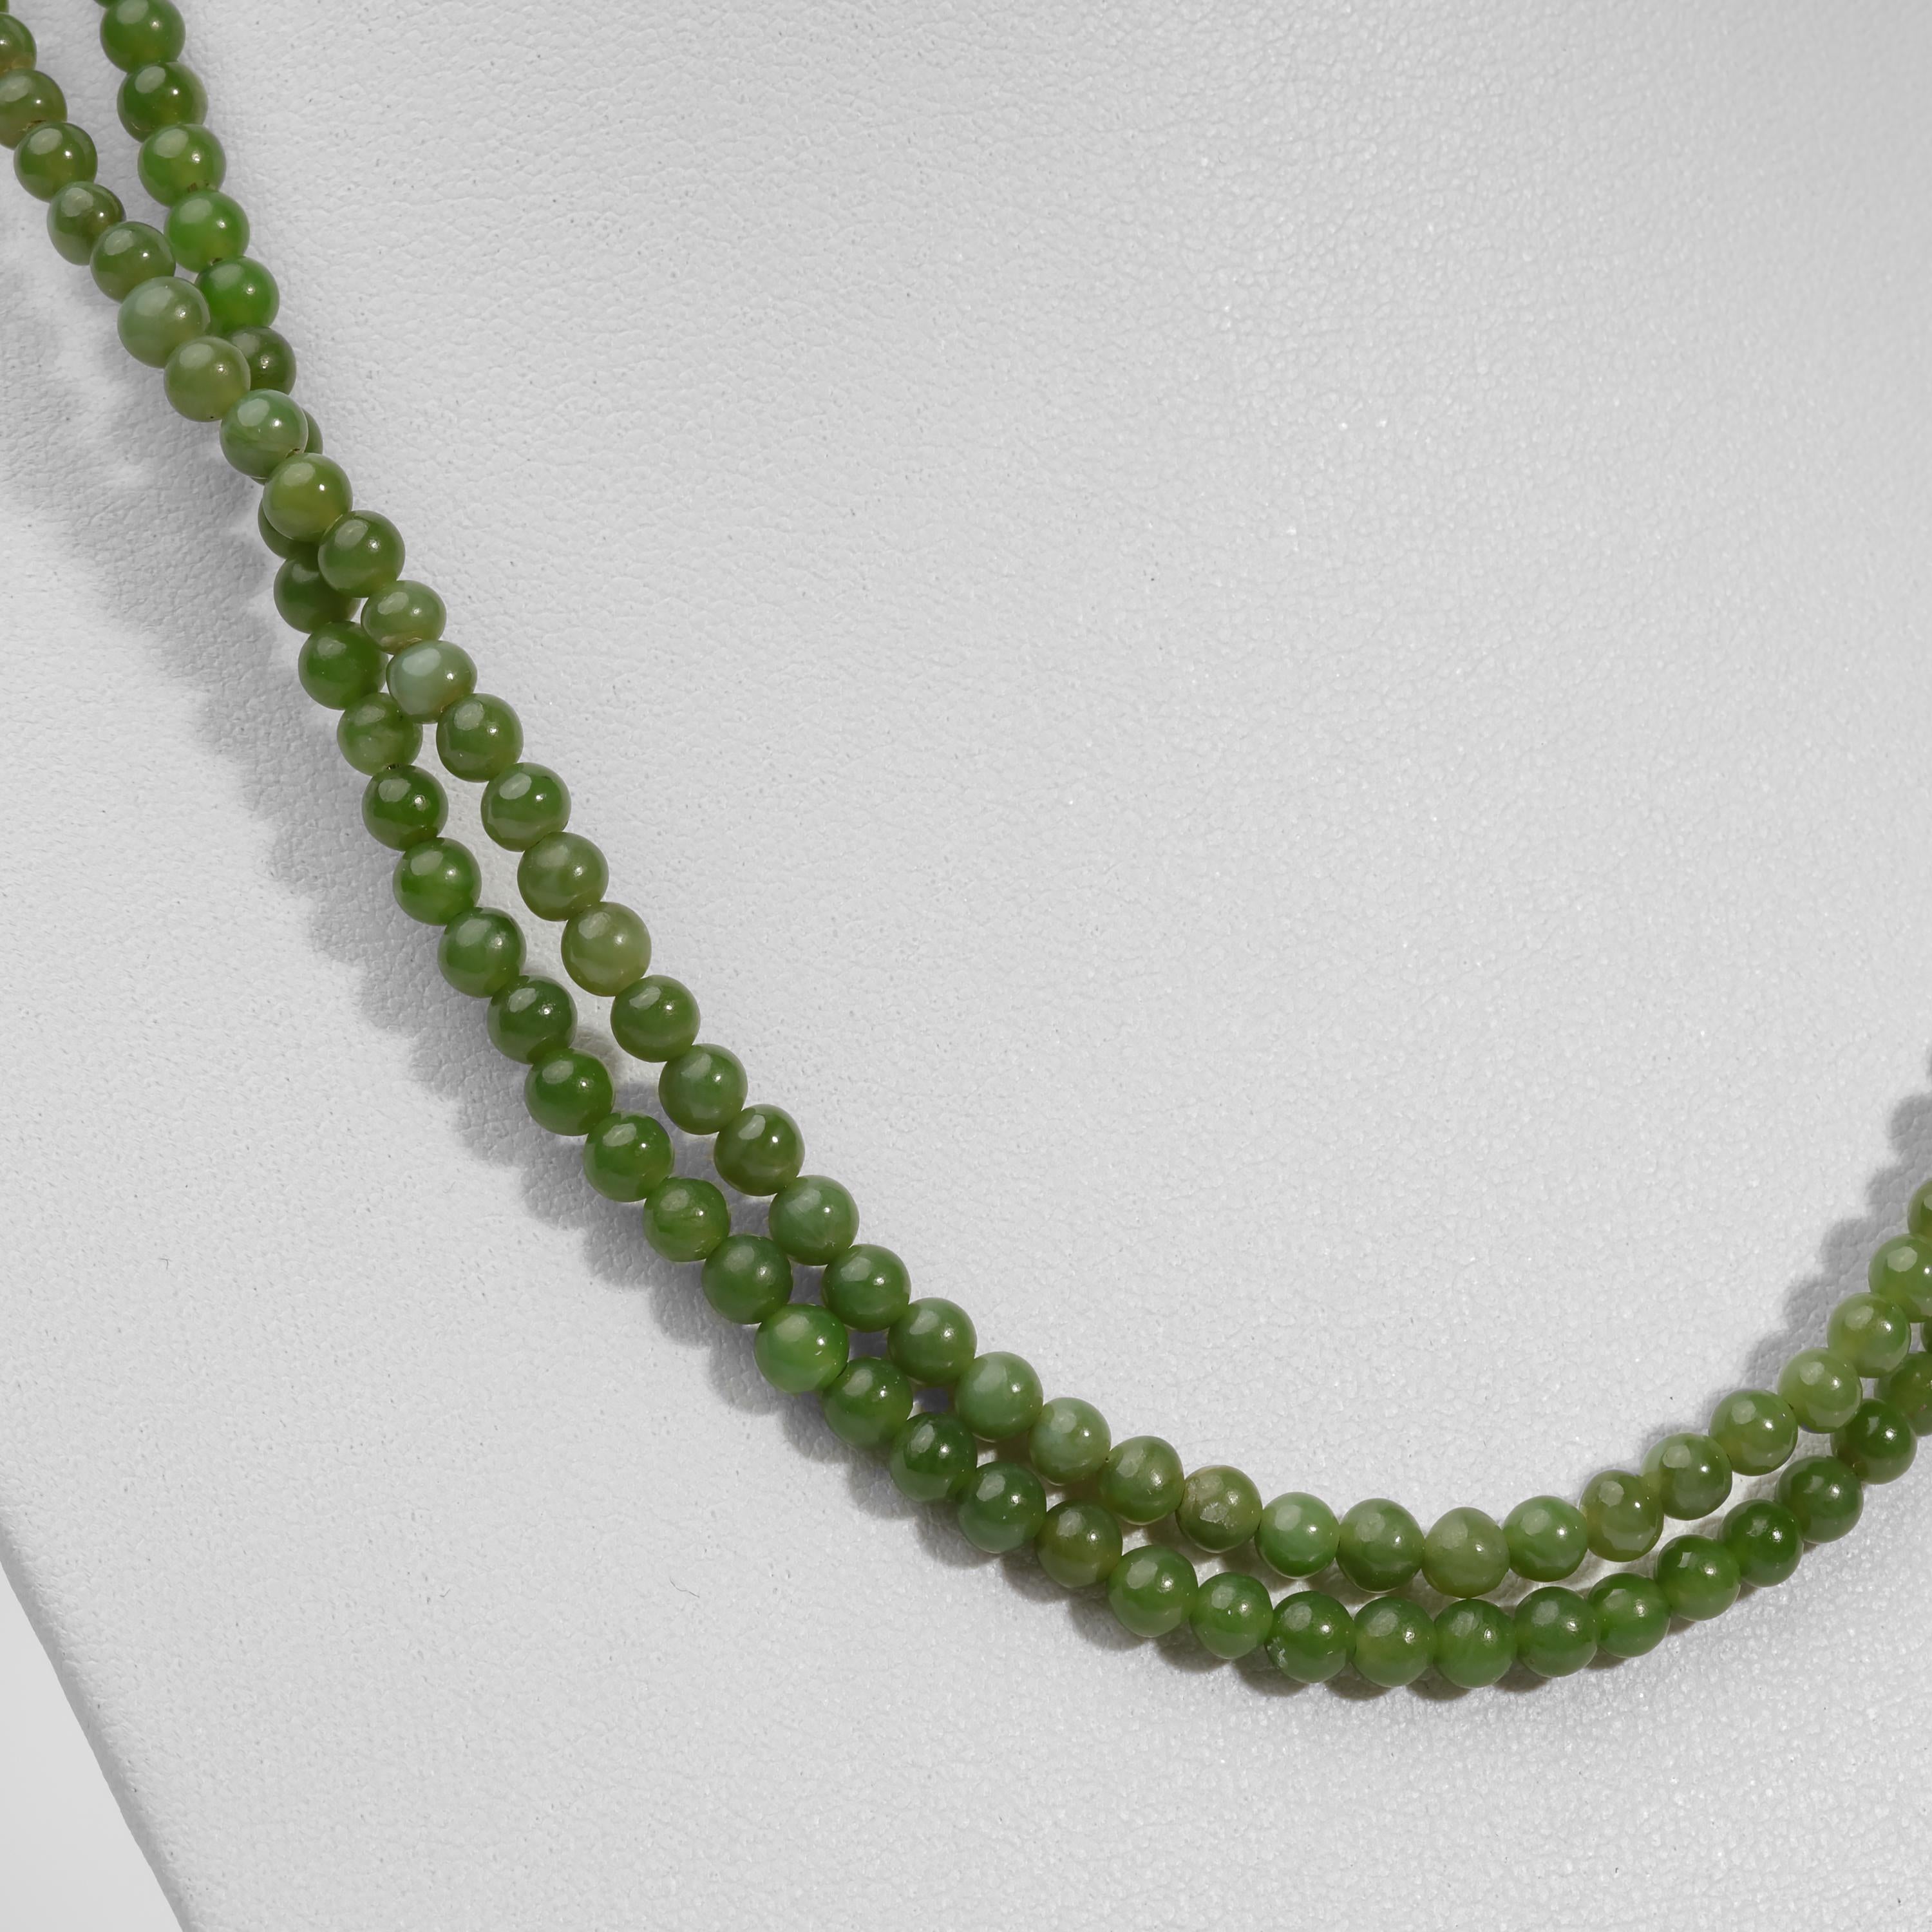 Modern Nephrite Jade Necklace or Bracelet is Beautifully Durable and Versatile